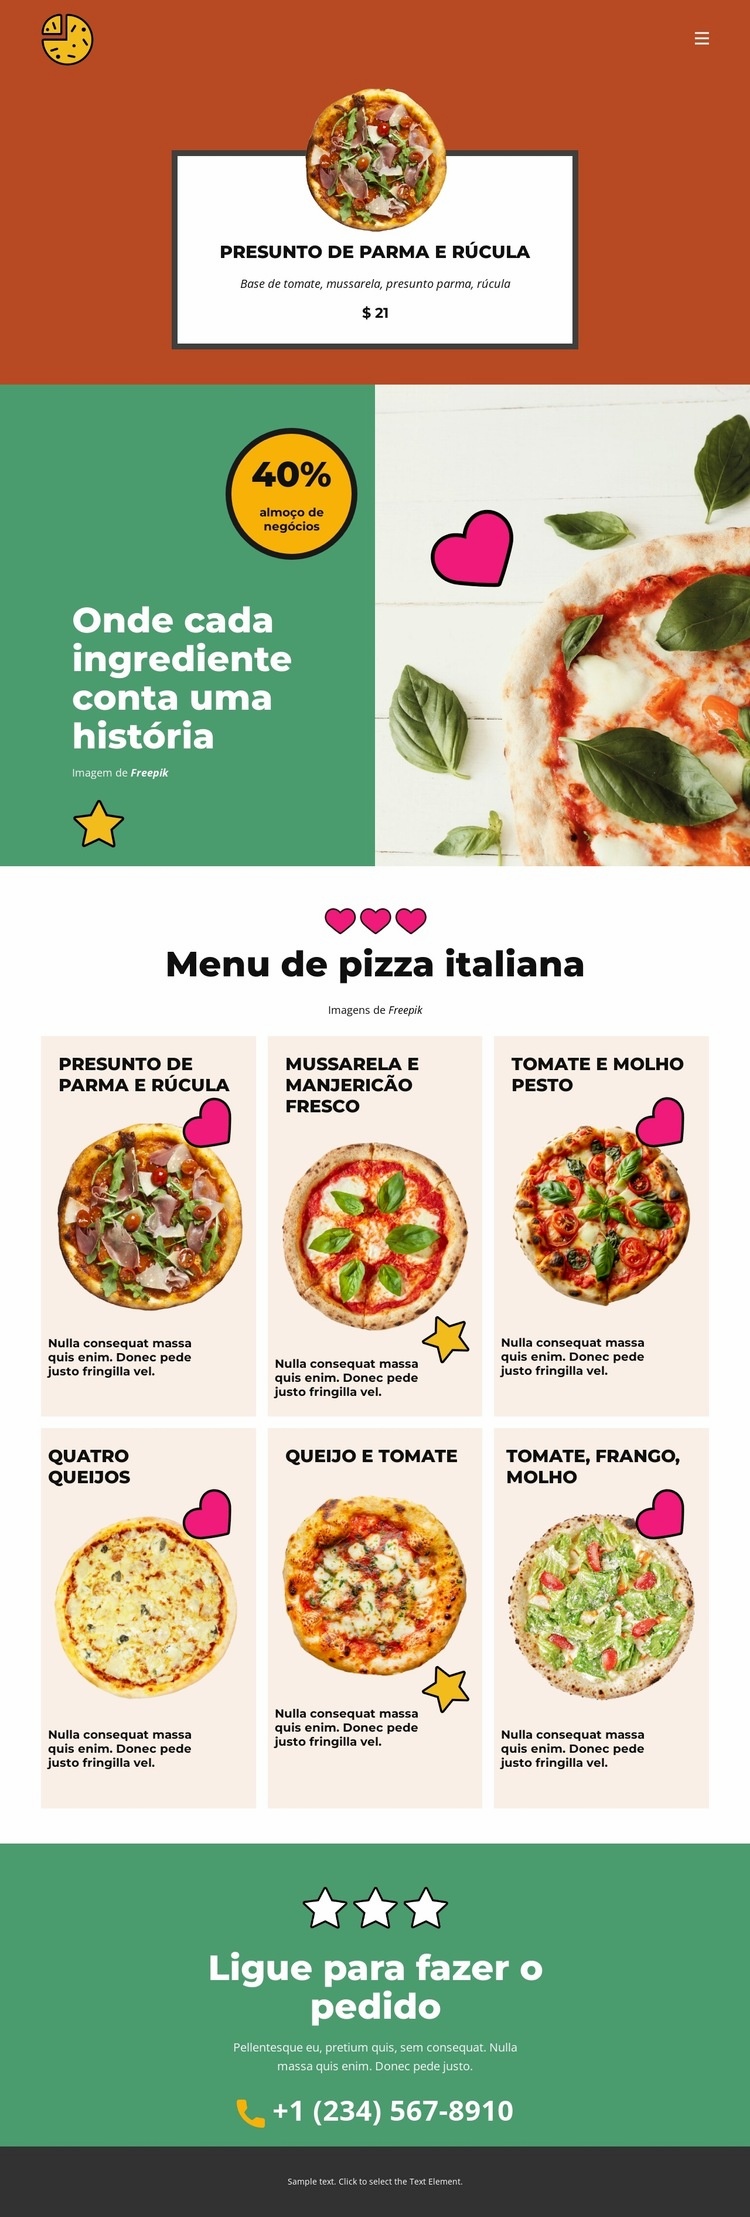 Fun Facts about Pizza Landing Page